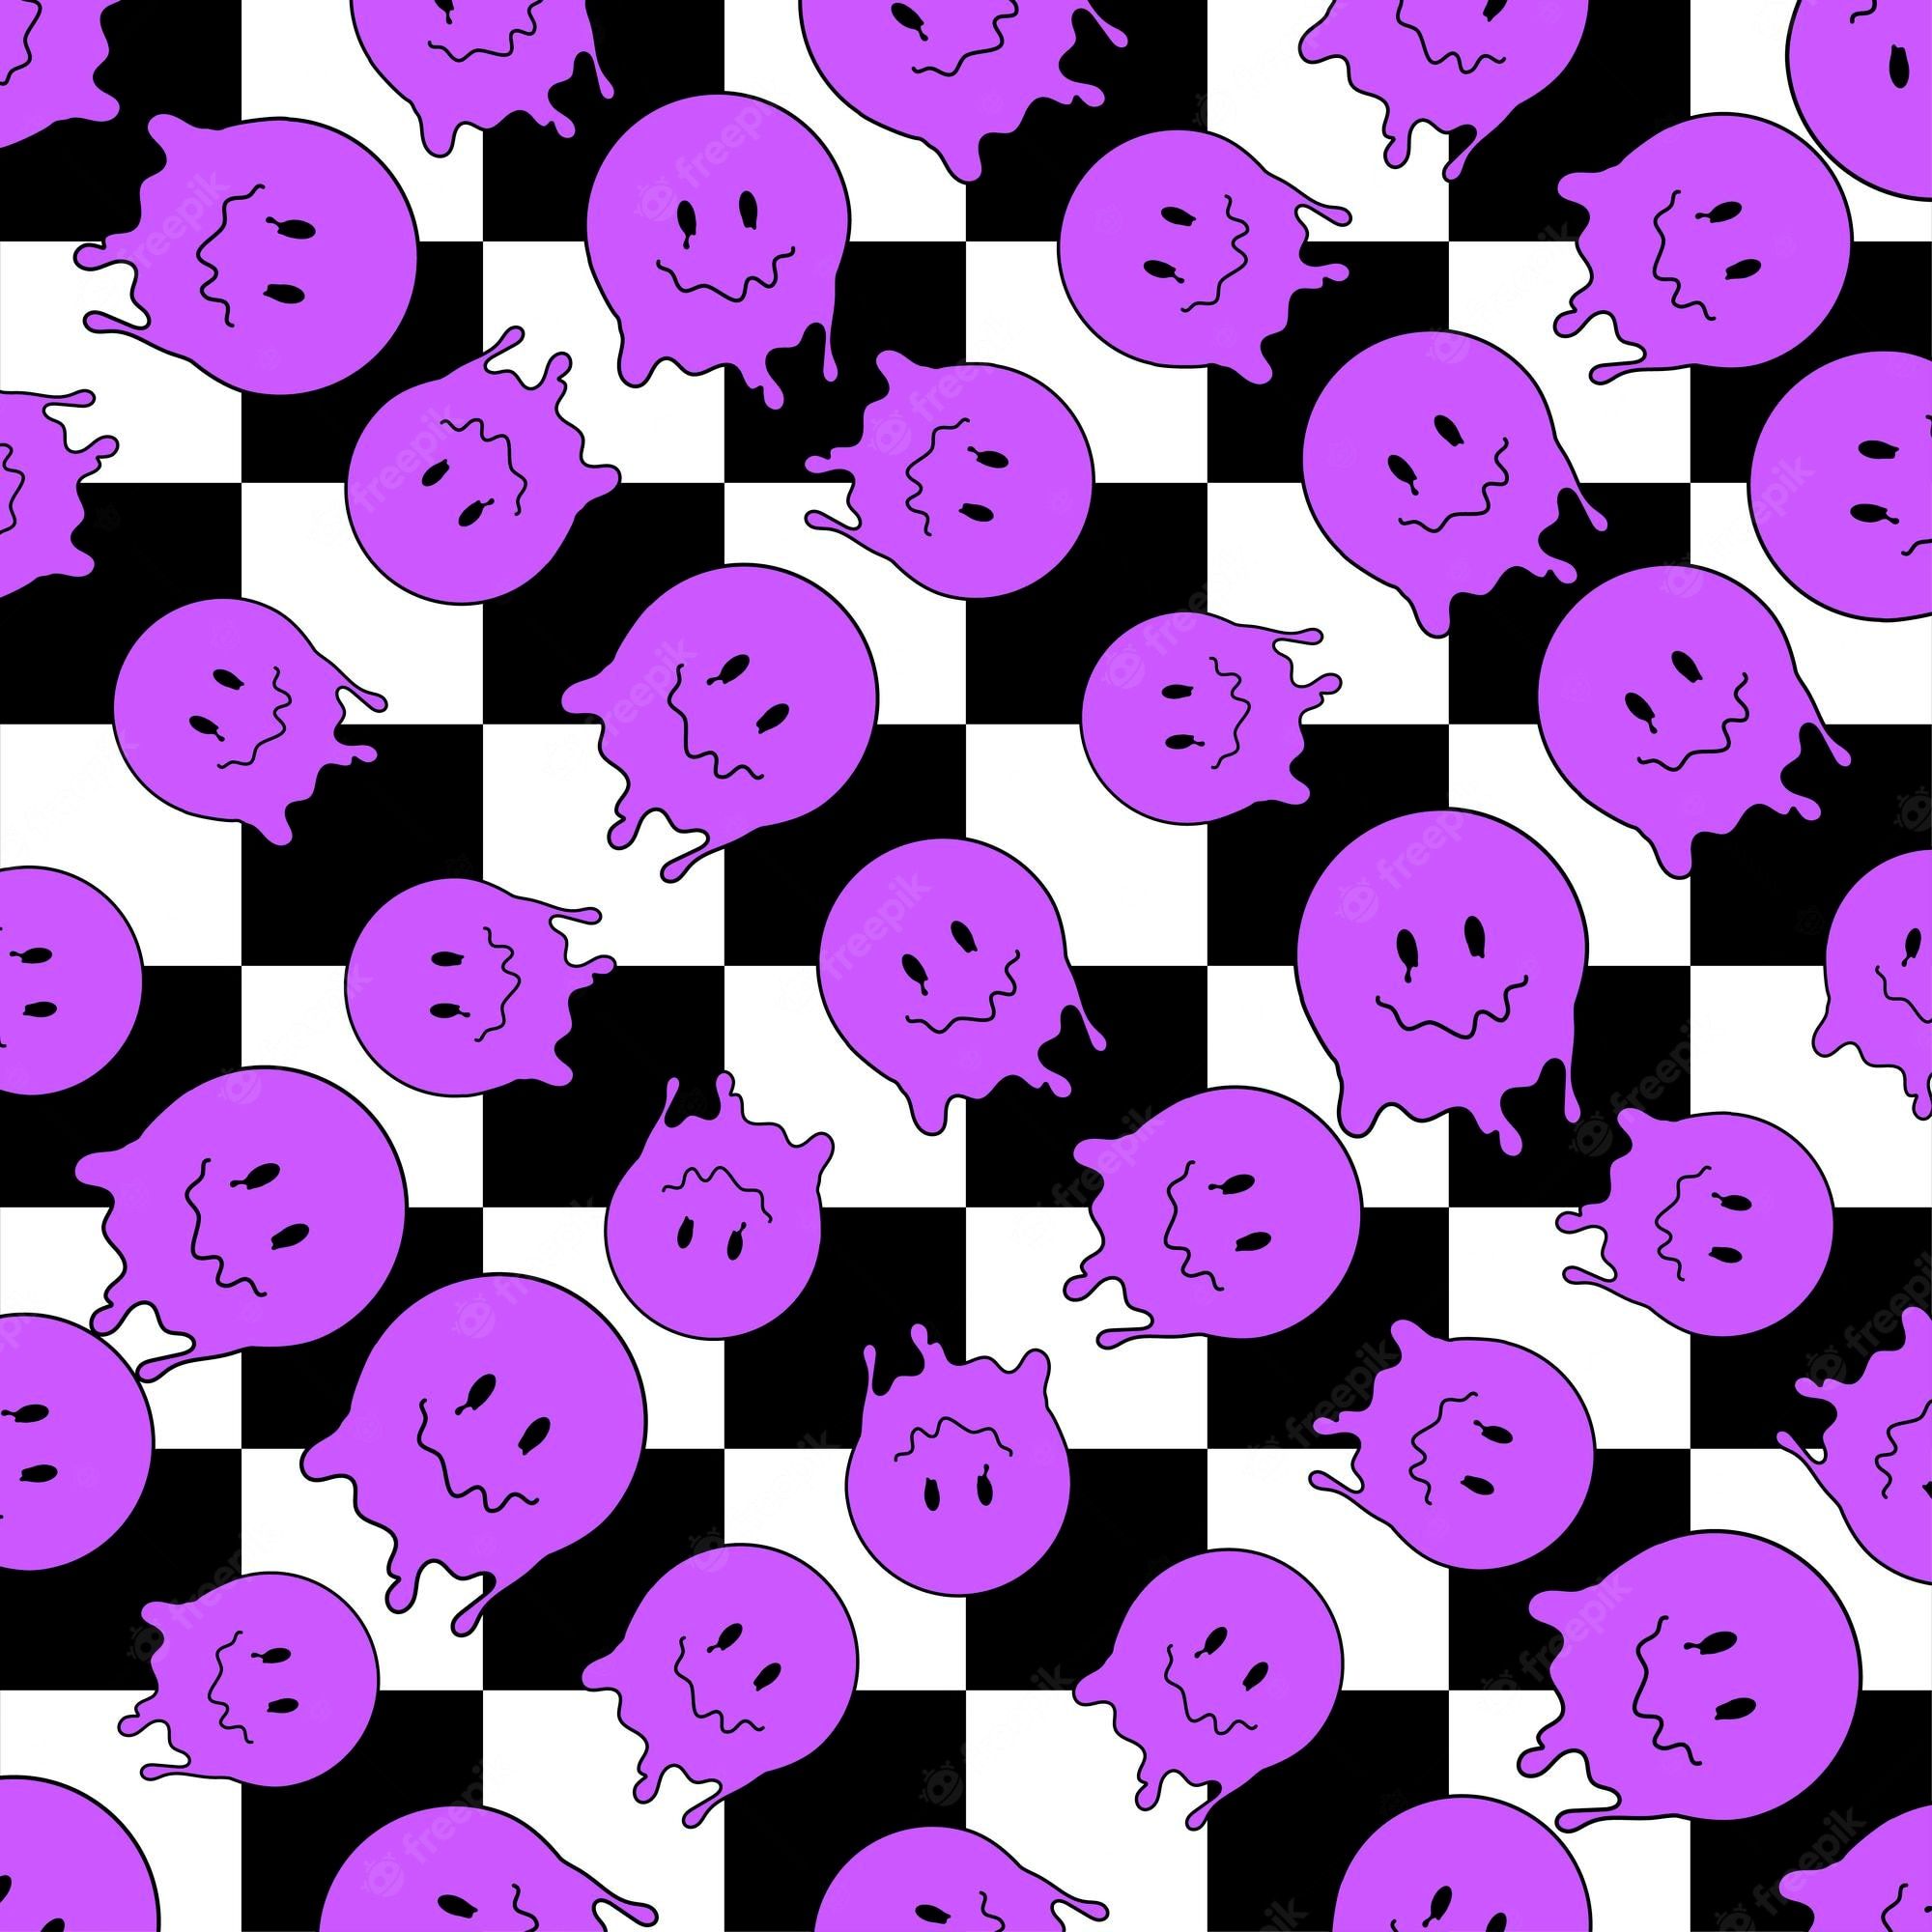 A repeating pattern of purple smiley faces with dripping cheeks on a black and white checkered background - Y2K, trippy